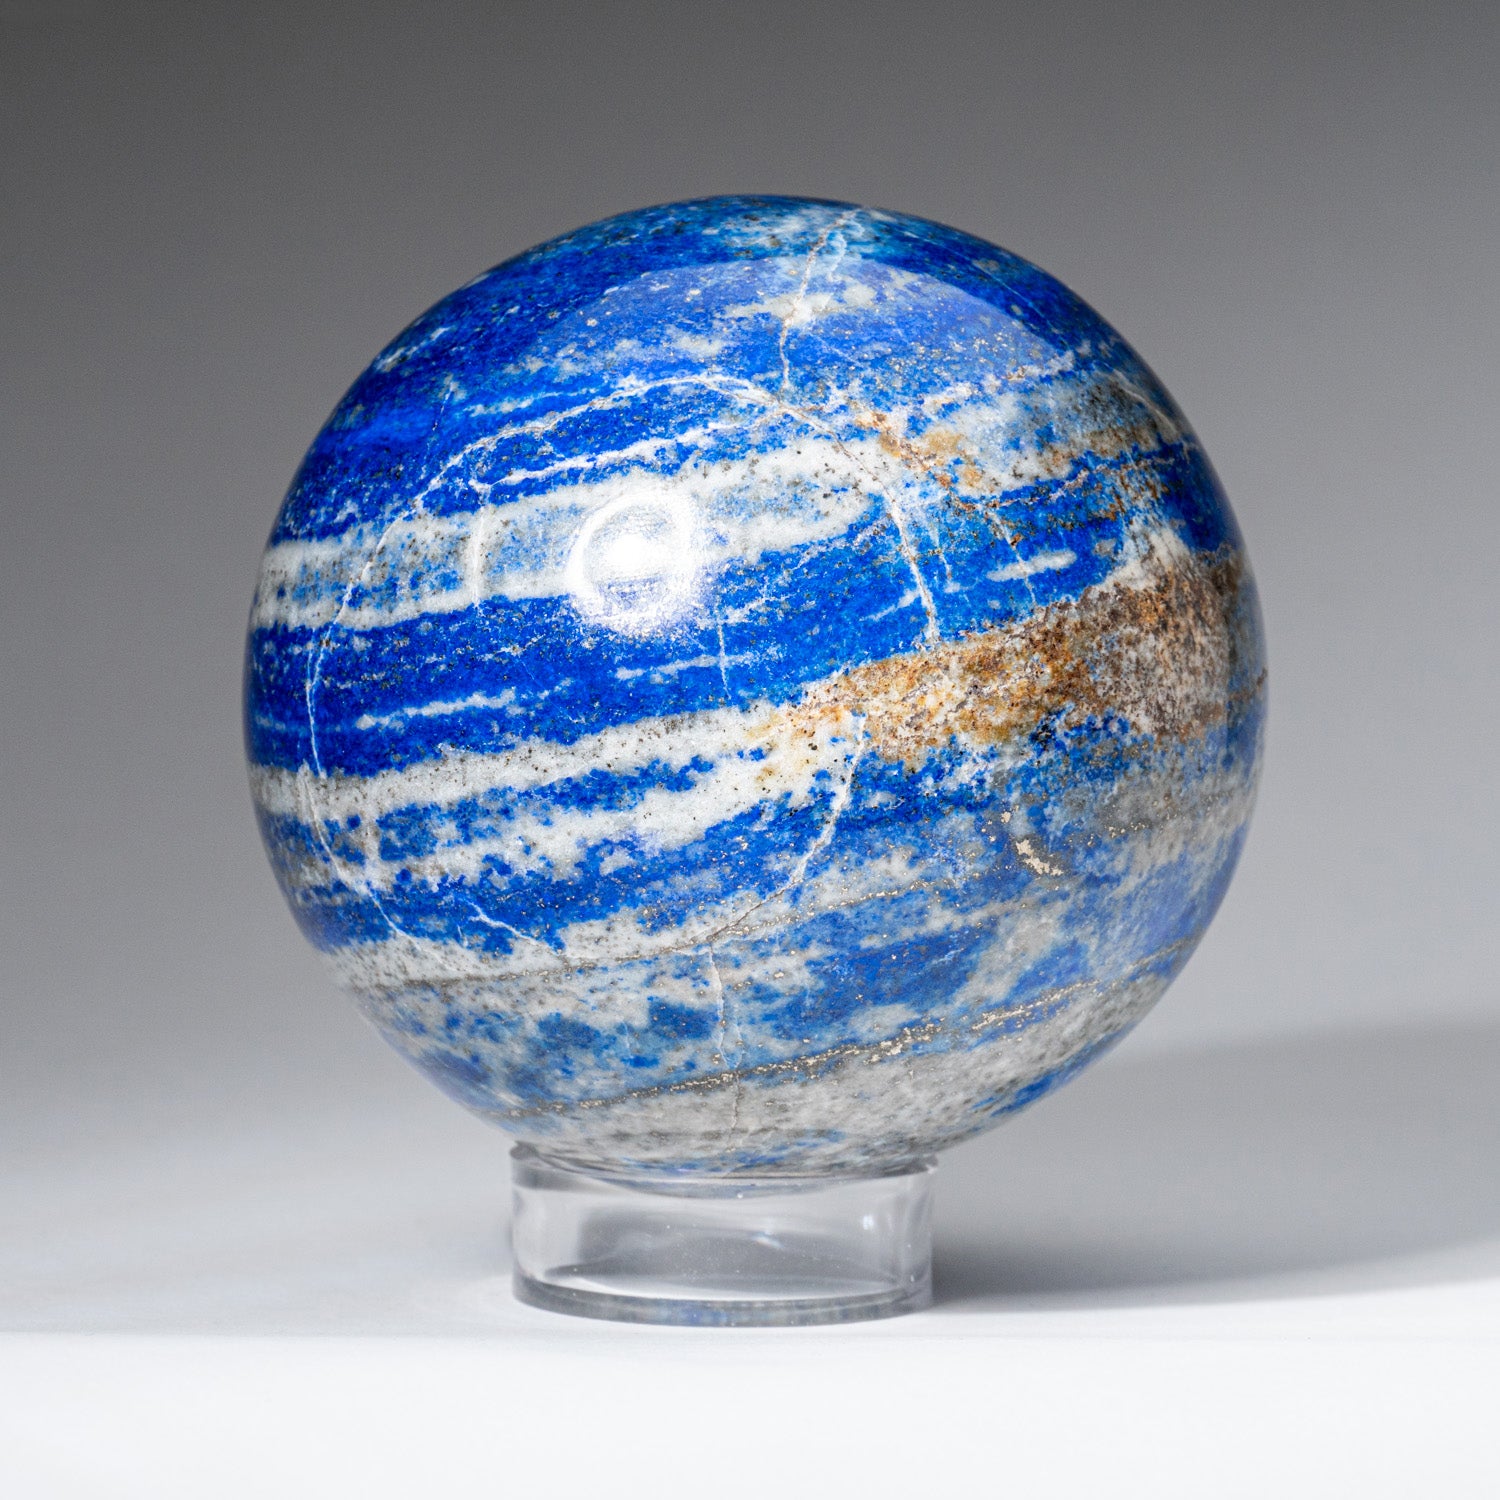 Polished Lapis Lazuli Sphere from Afghanistan (4", 4 lbs)